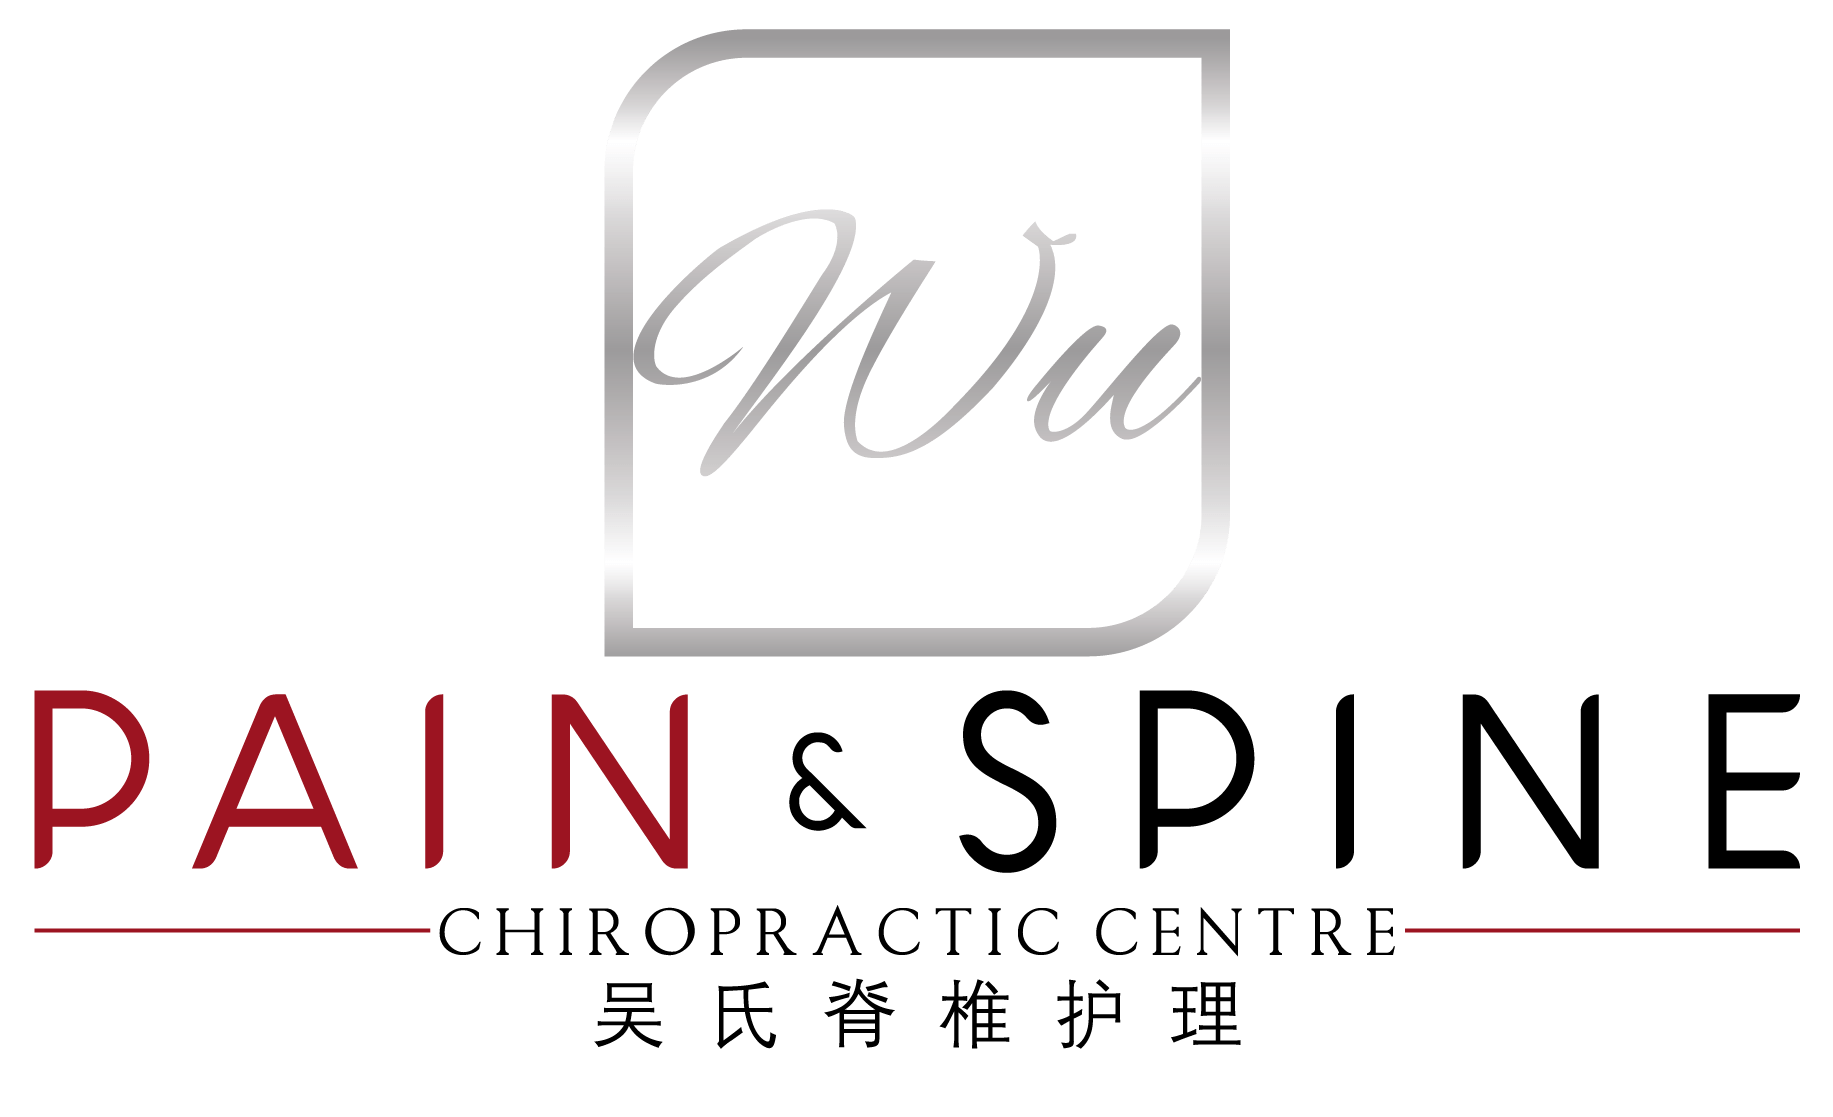 https://my.mncjobz.com/company/wu-pain-and-spine-chiropractic-centre